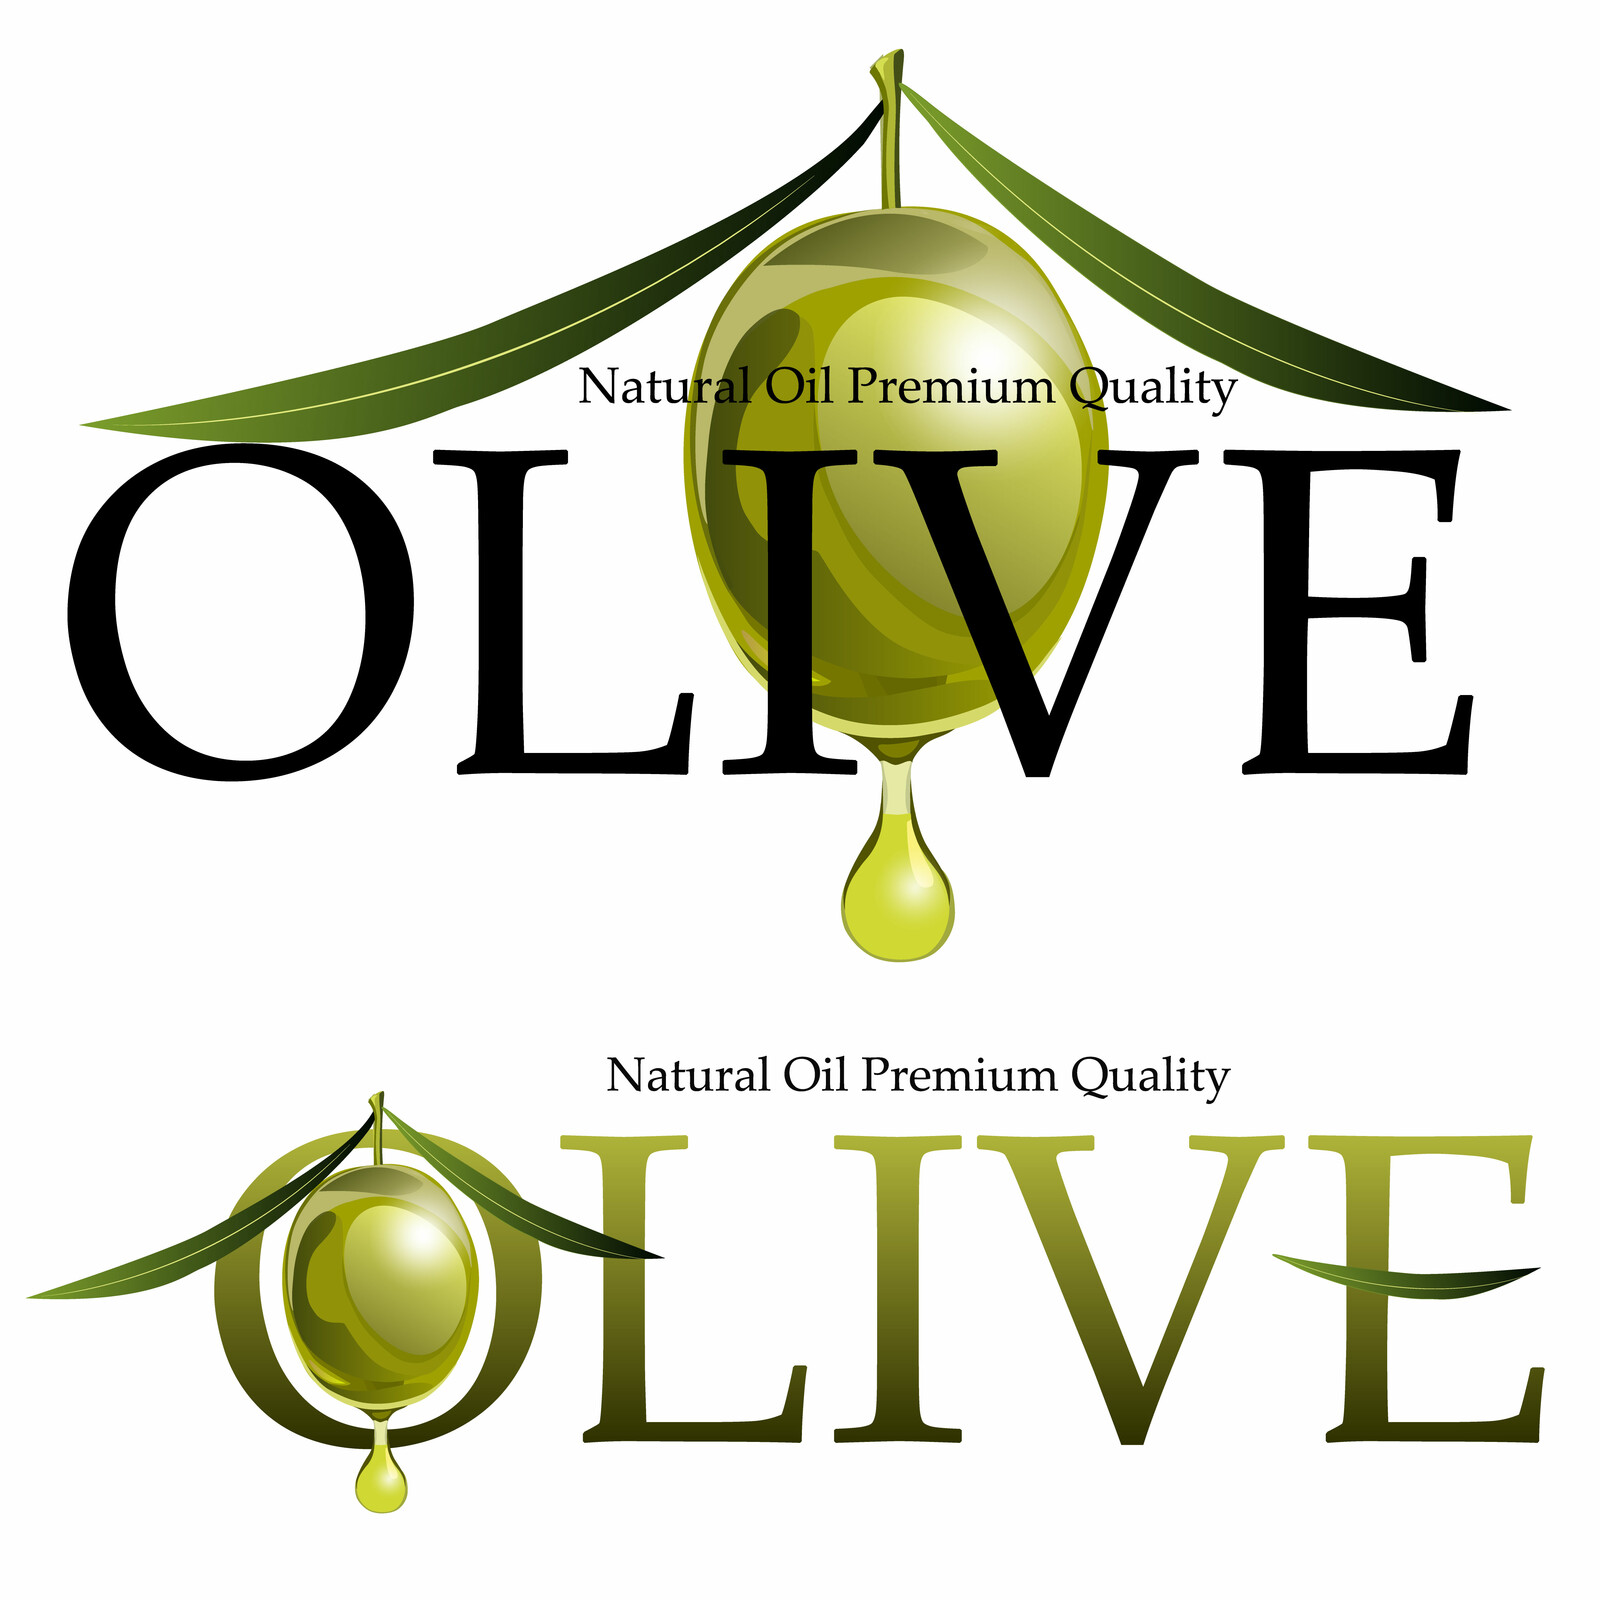 OLIVE LABEL VECTOR 3